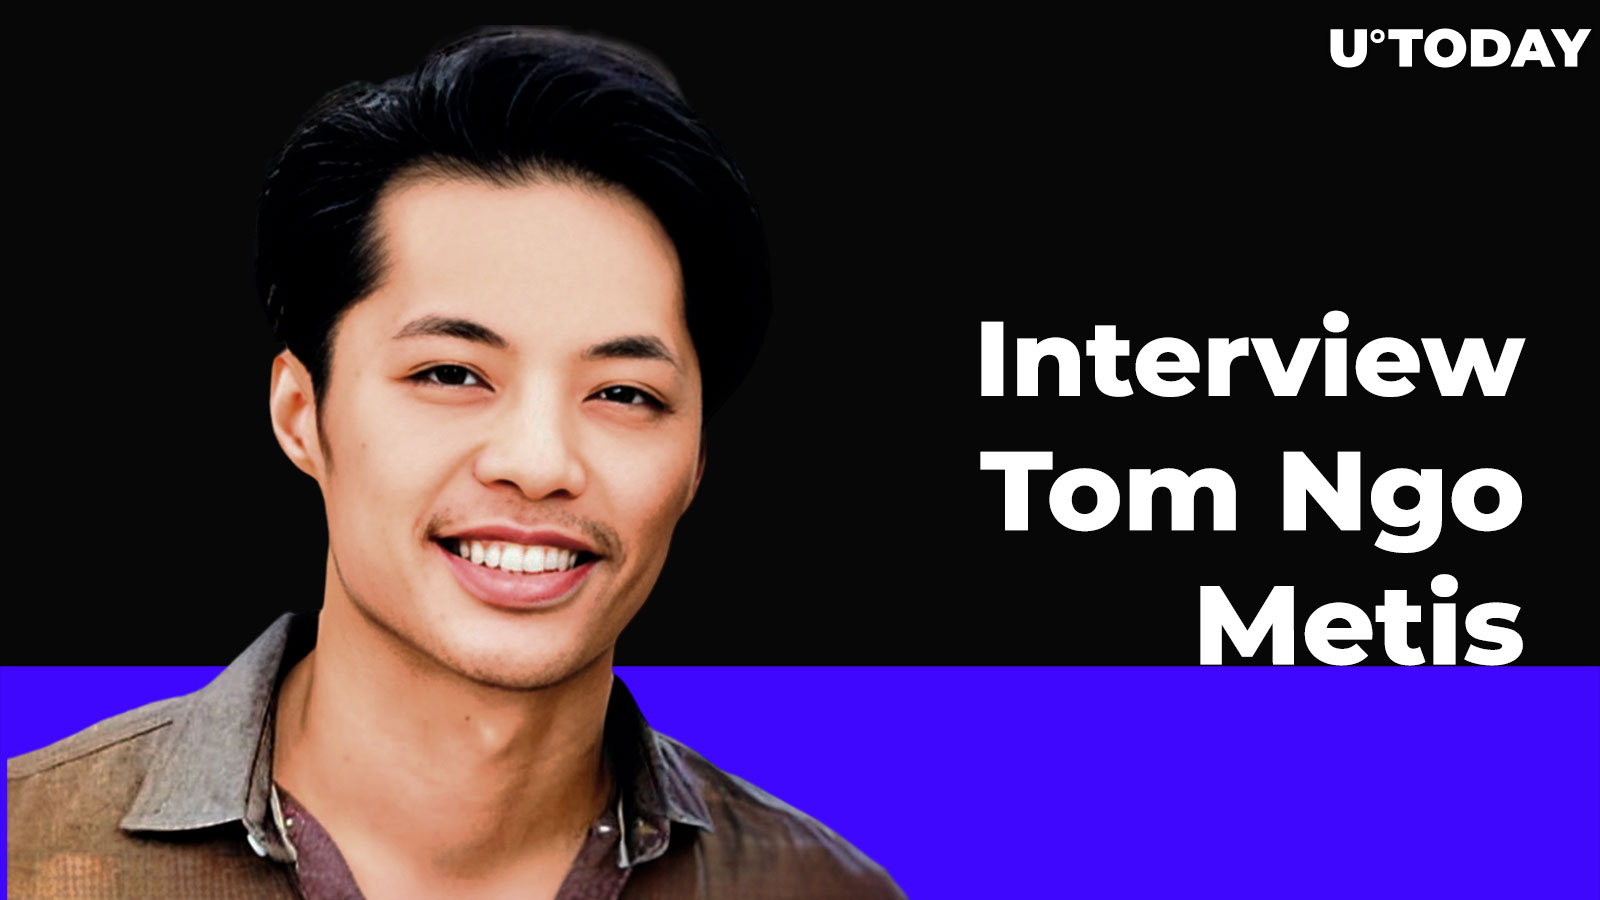 $25 Mln Dev Support Fund, First Decentralized Sequencer and Hybrid Rollups: Interview with Tom Ngo, Metis’ Executive Lead